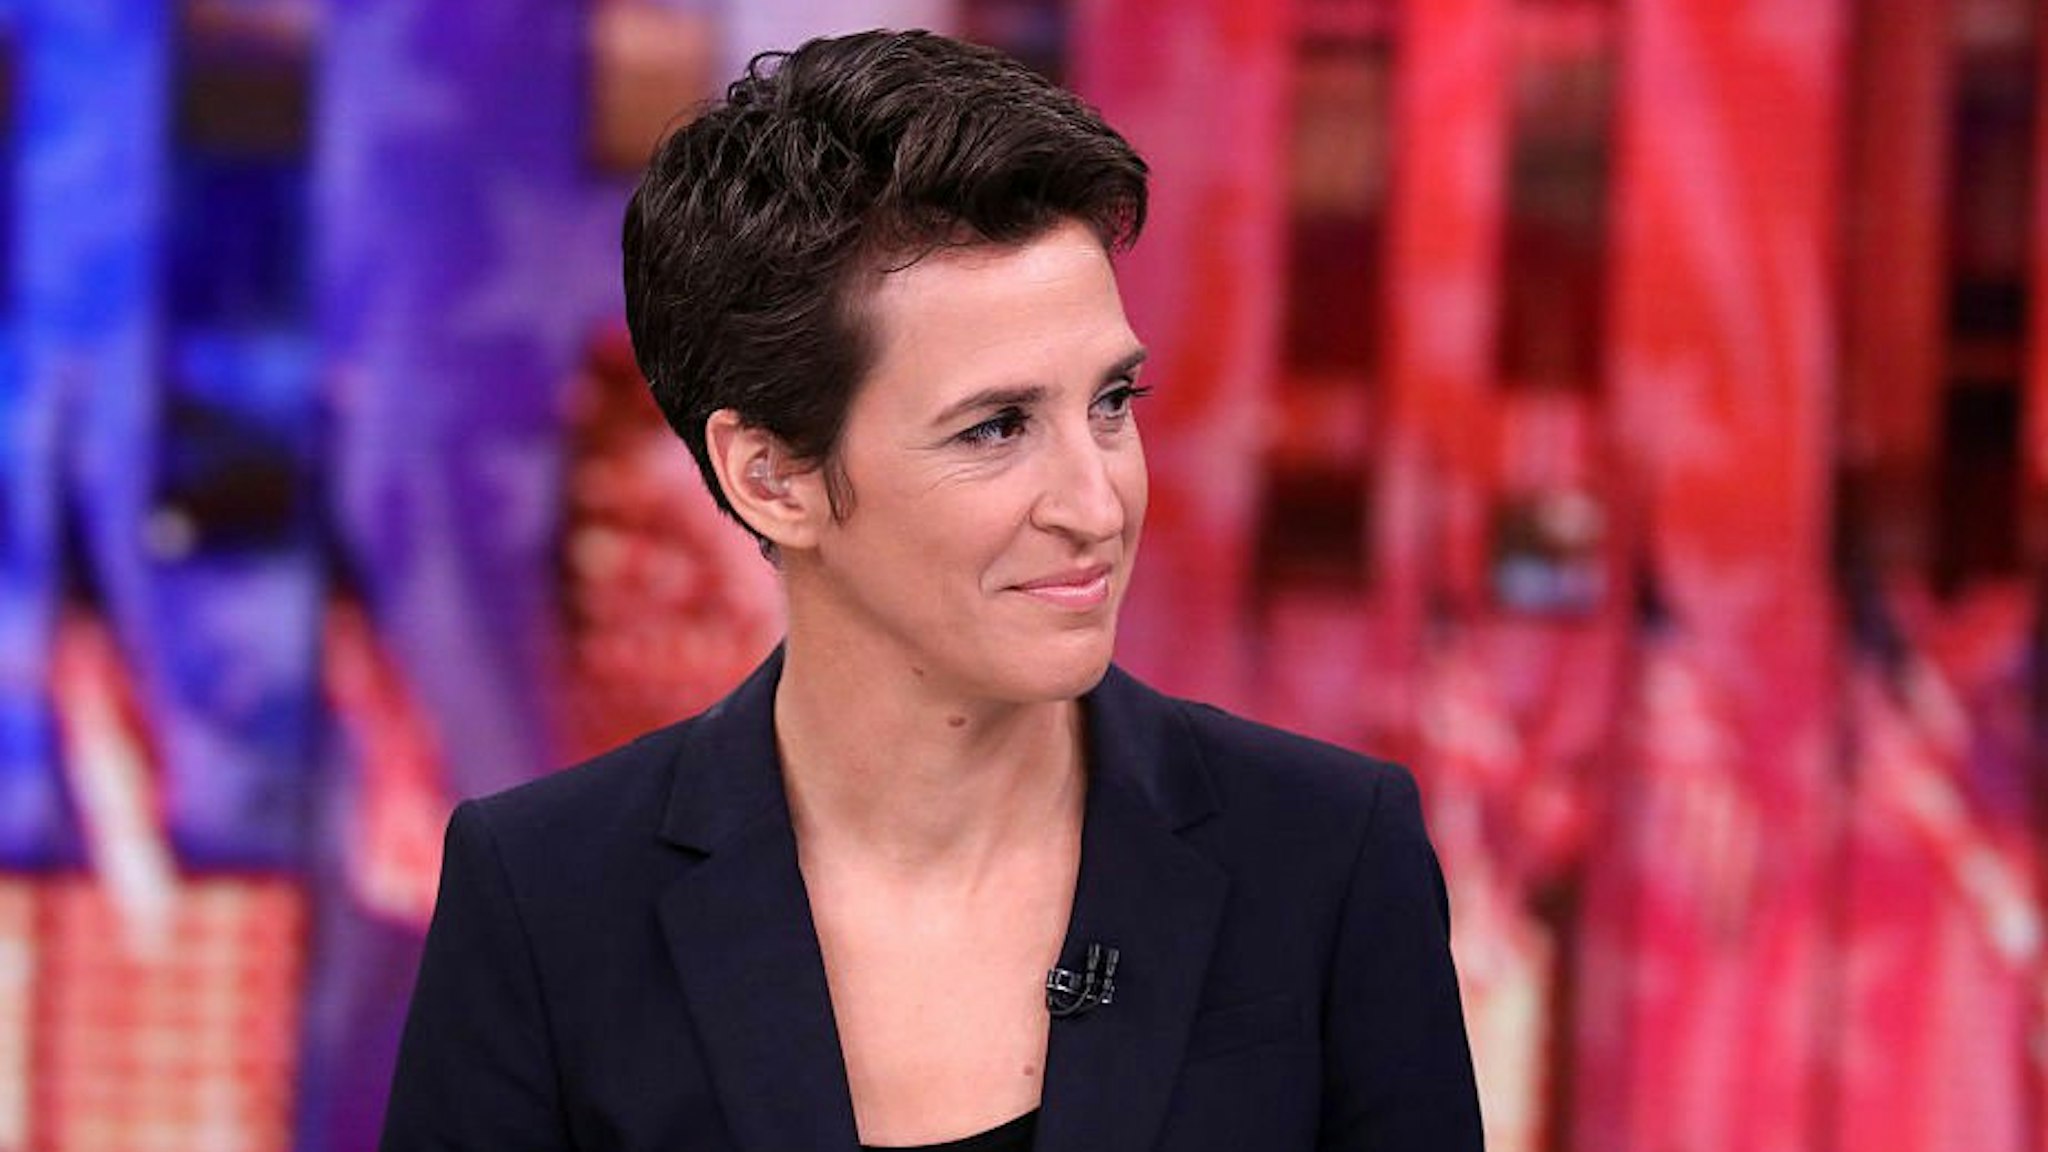 Rachel Maddow, Host, "The Rachel Maddow Show" on Tuesday, November 8, 2016 from New York.